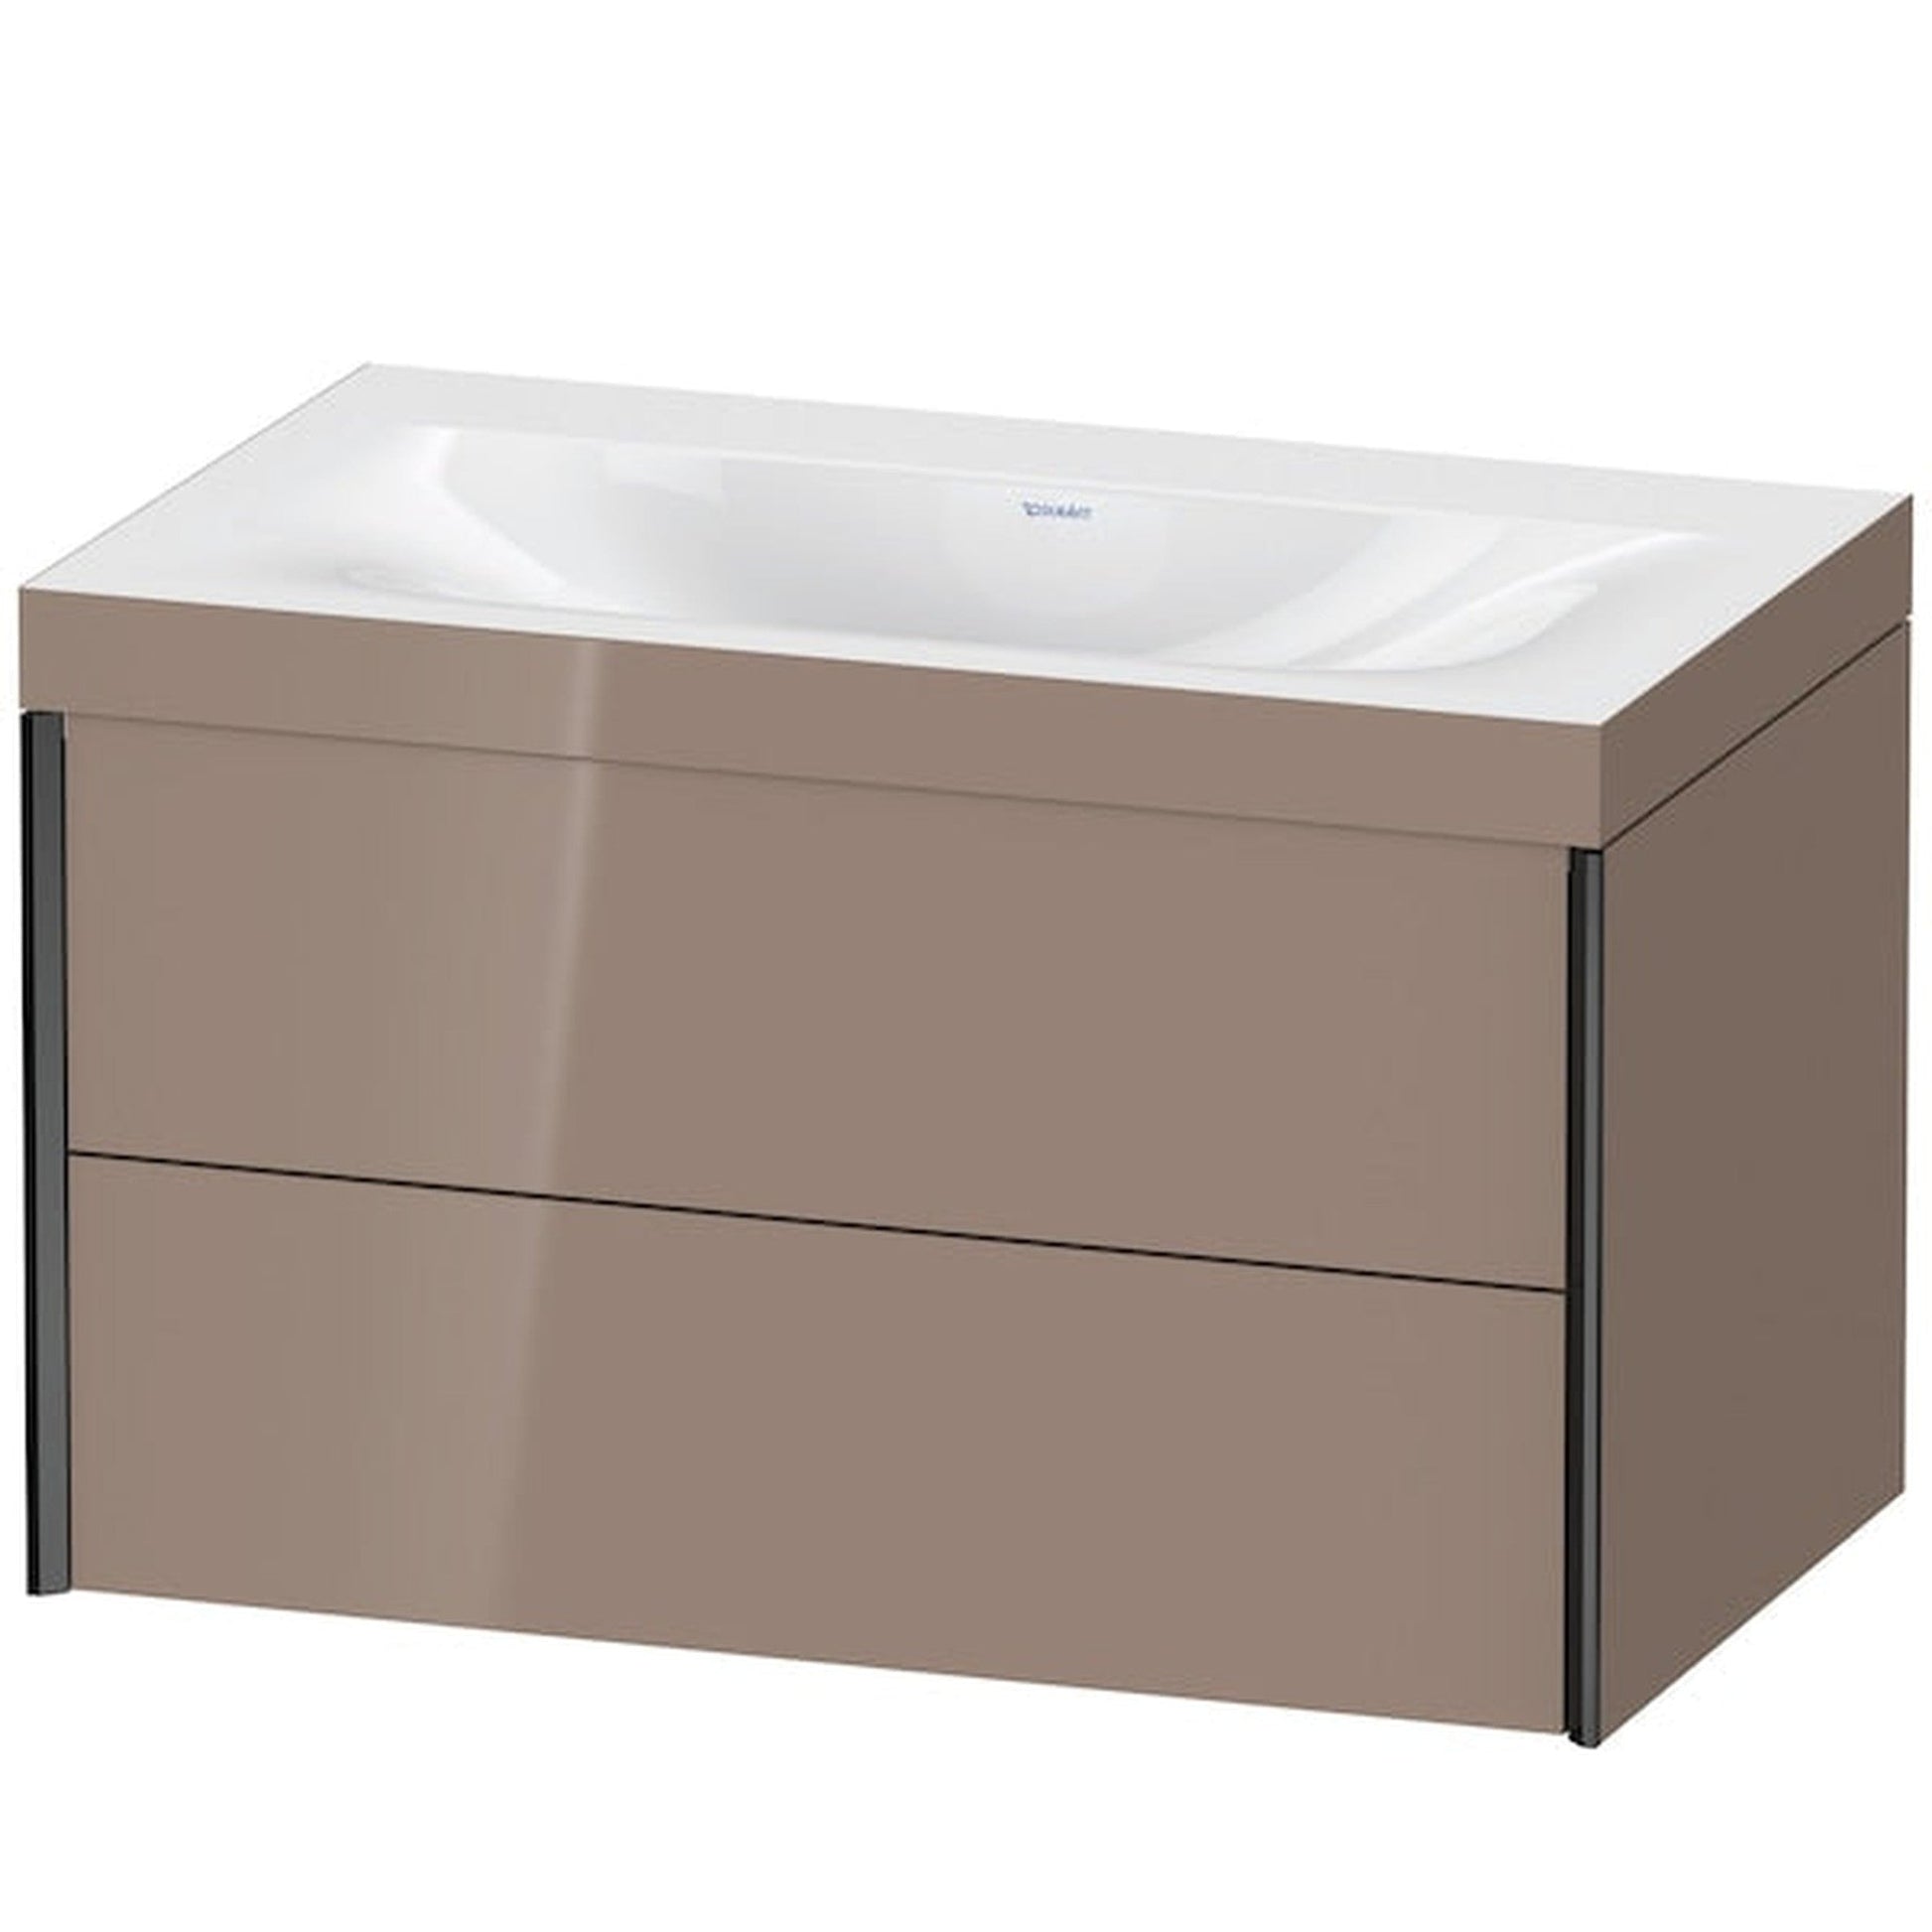 Duravit Xviu 31" x 20" x 19" Two Drawer C-Bonded Wall-Mount Vanity Kit Without Tap Hole, Cappuccino (XV4615NB286C)